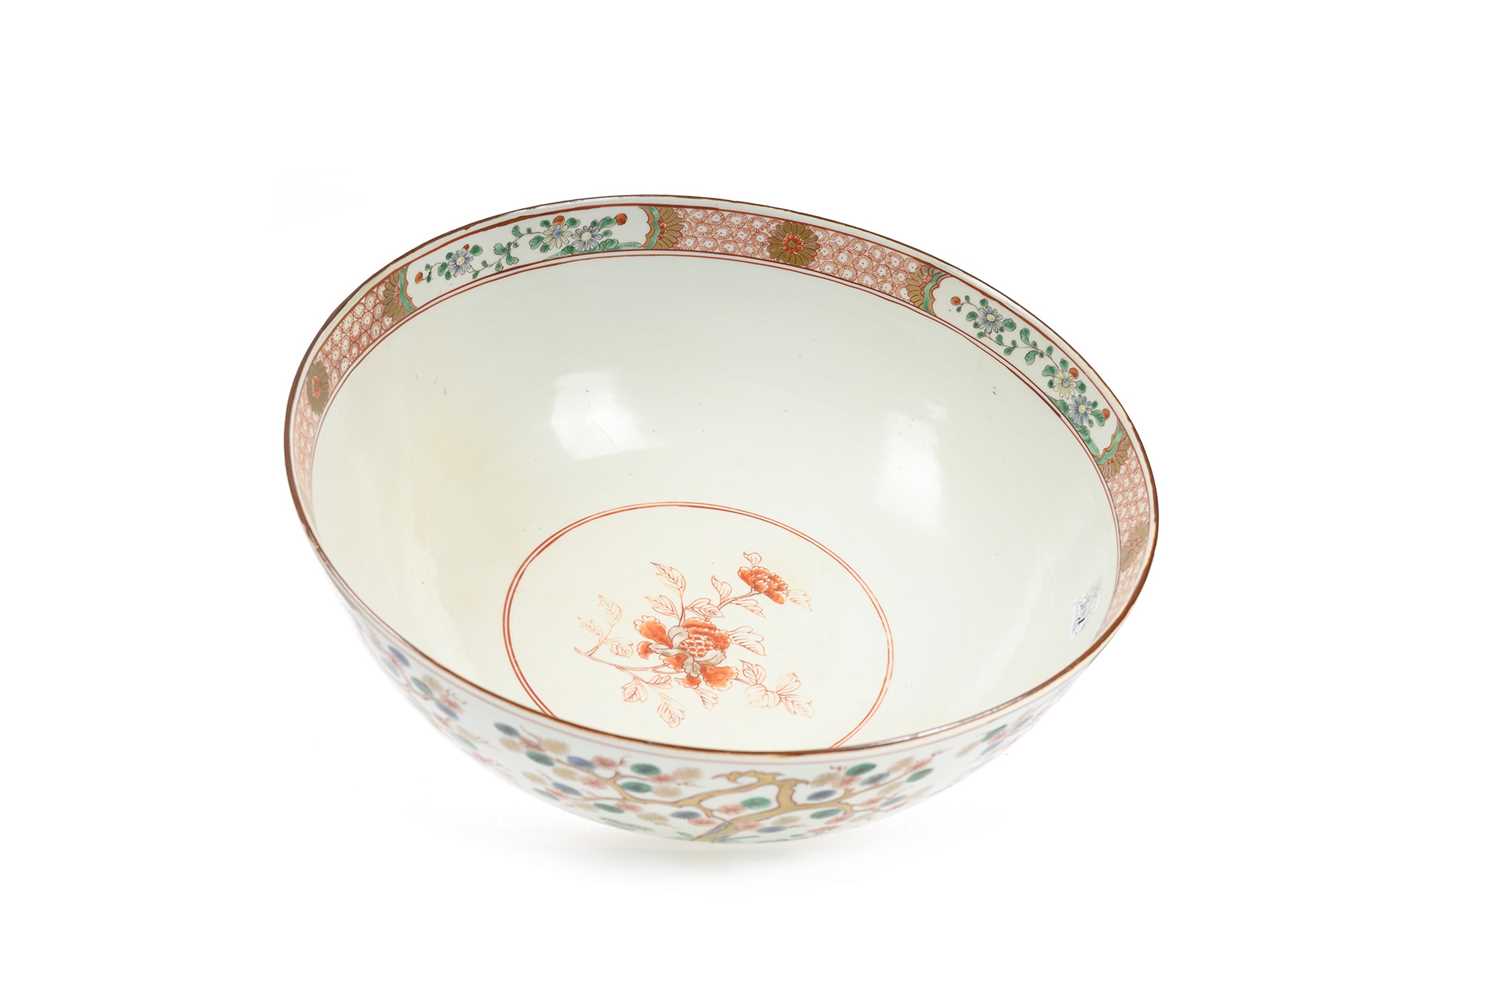 LARGE CHINESE FAMILLE ROSE PUNCH BOWL, 19TH CENTURY